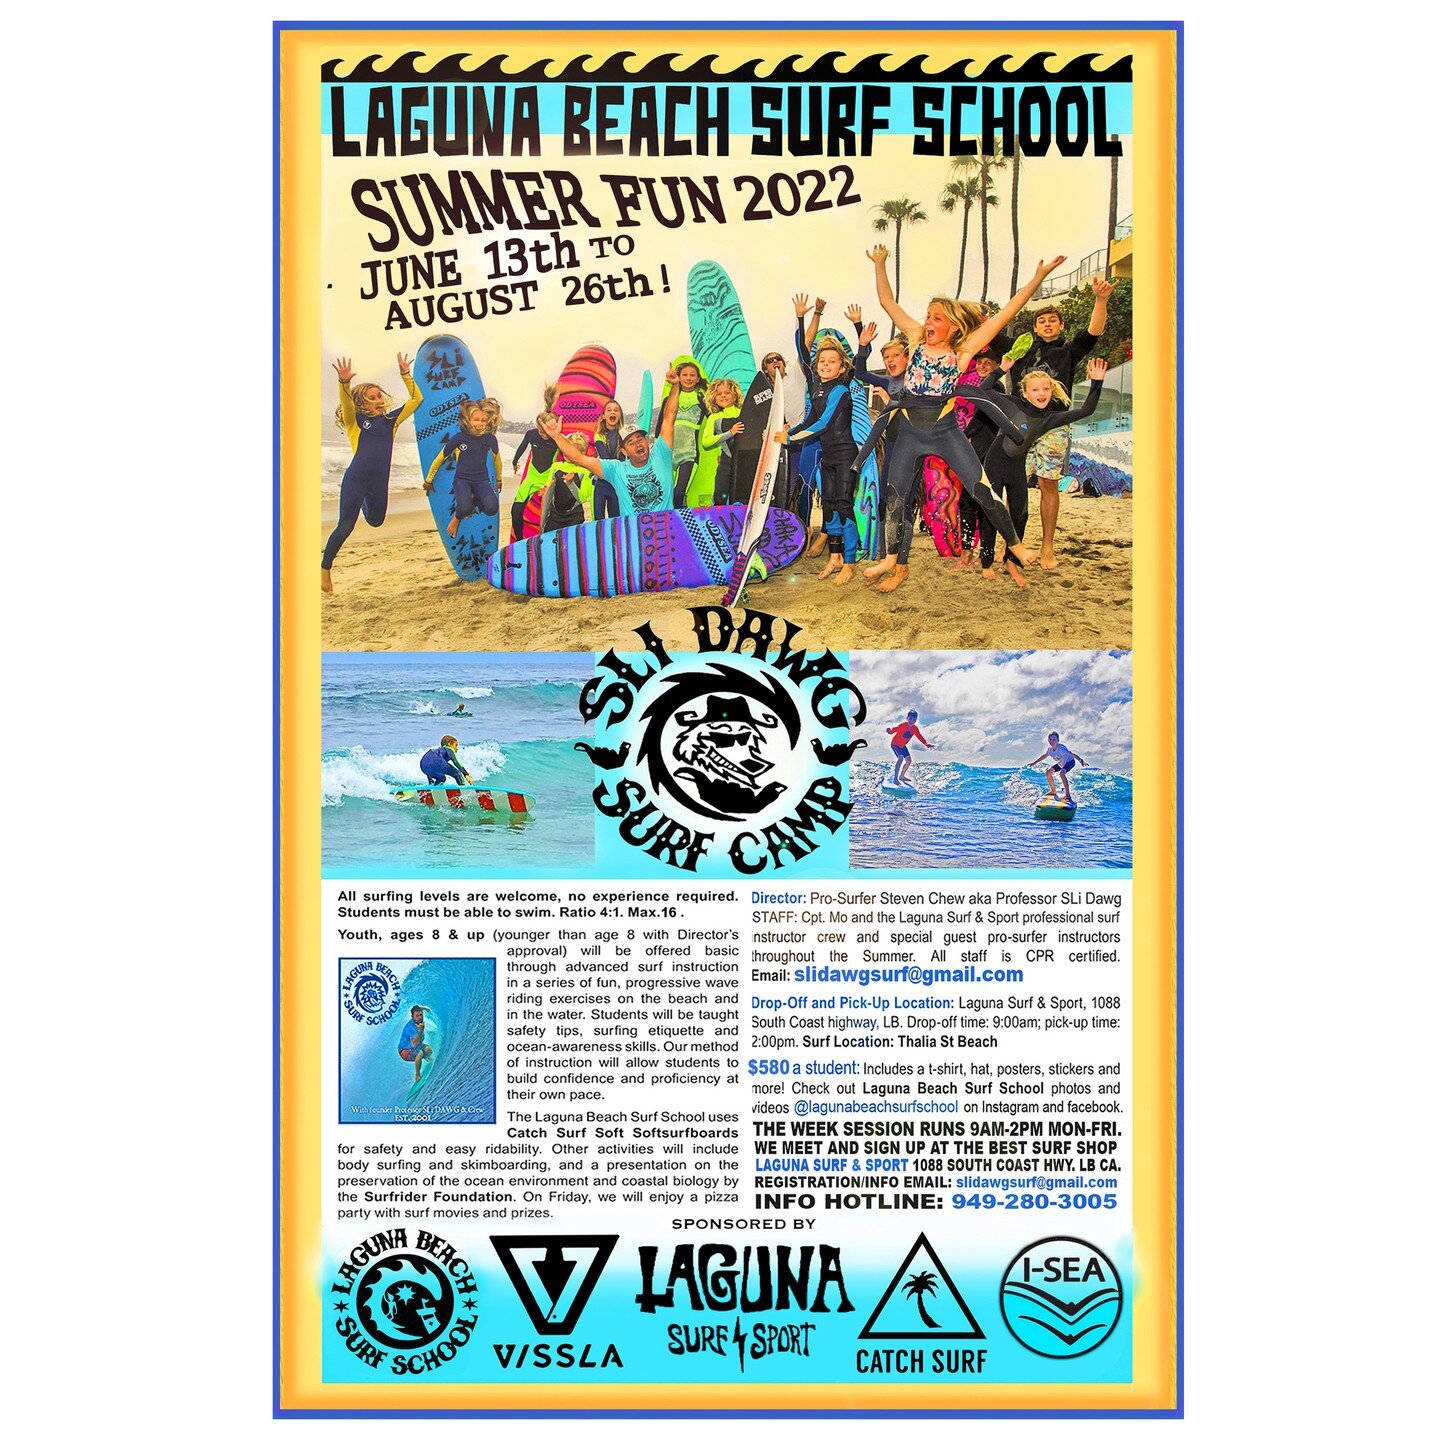 Summer surf camp fun is a go! Sign up today. 8 more weeks left! Happy Summer! 
🌞🤙🏽🌊🌊🌊🌊🌊🌊🌊🌊🌊🌊🌊